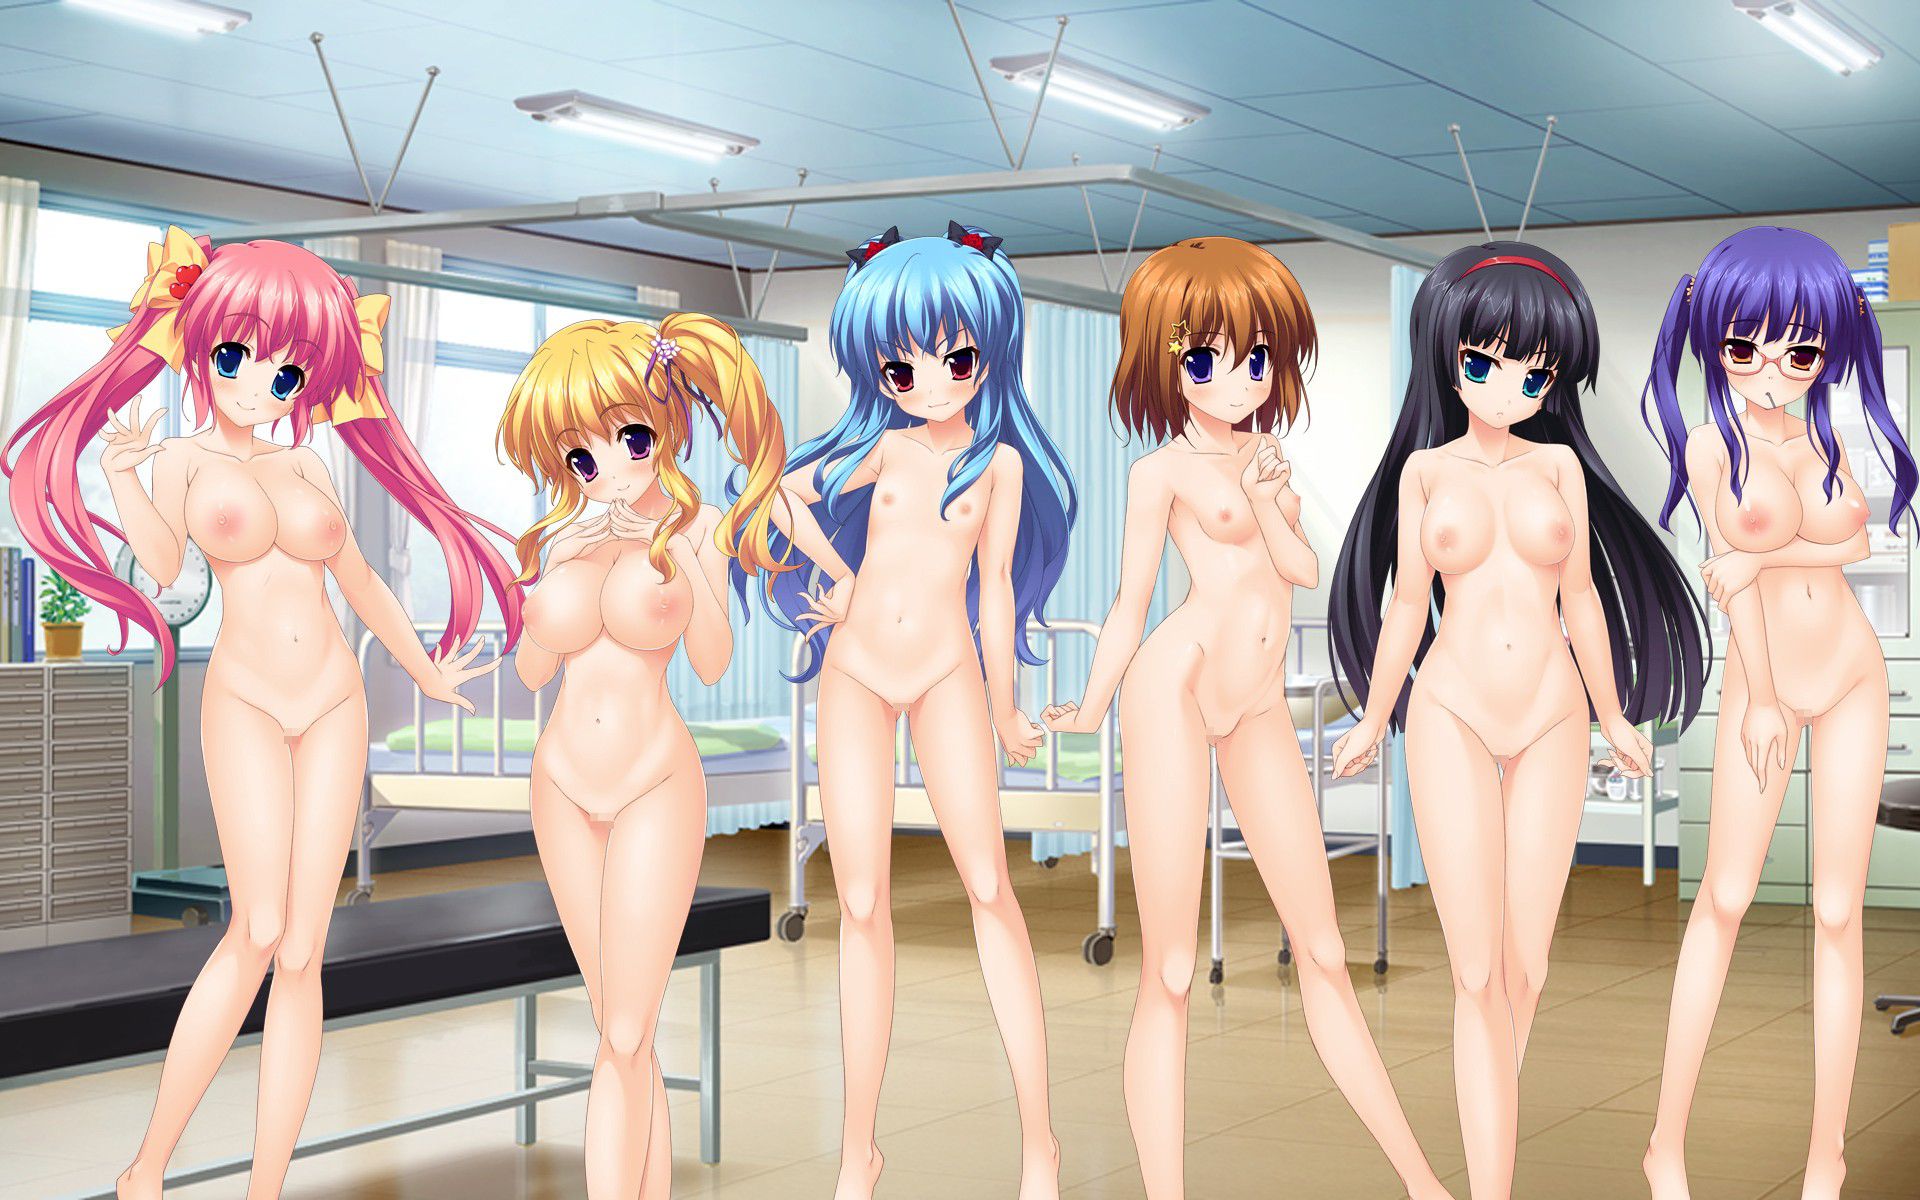 School after the eroge Club! [18 PC Bishoujo game CG] erotic wallpapers and pictures part 1 10